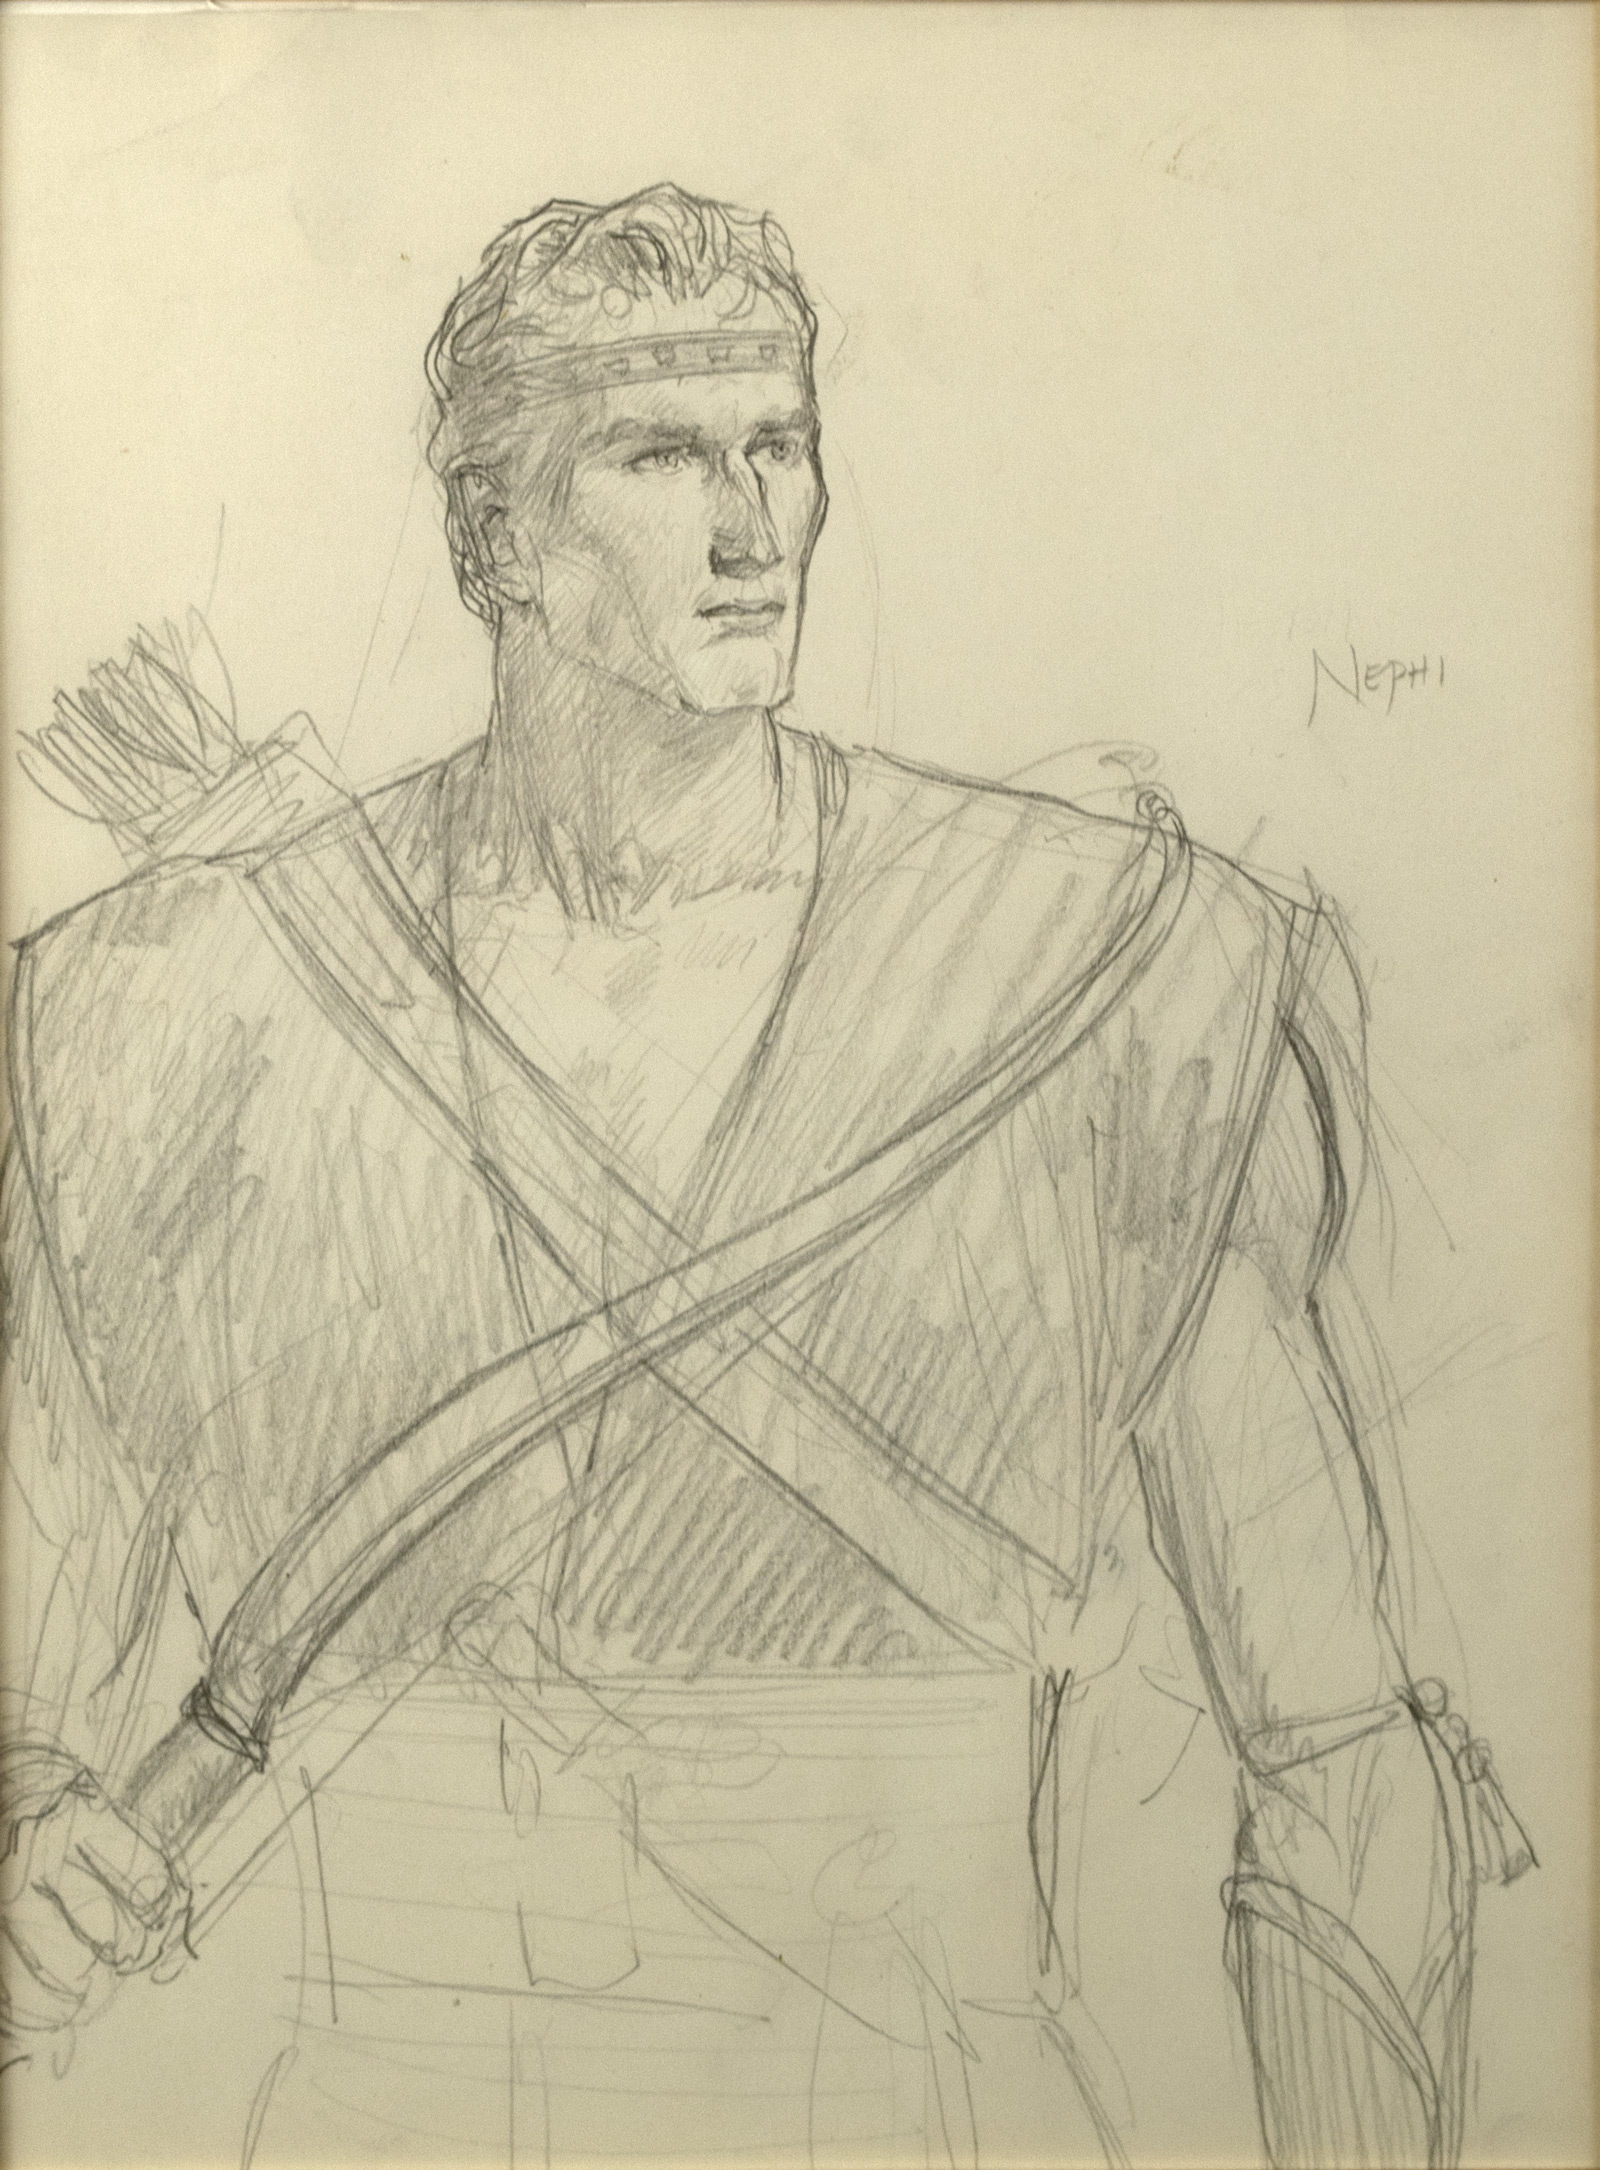 Study of “Nephi and His Bow”